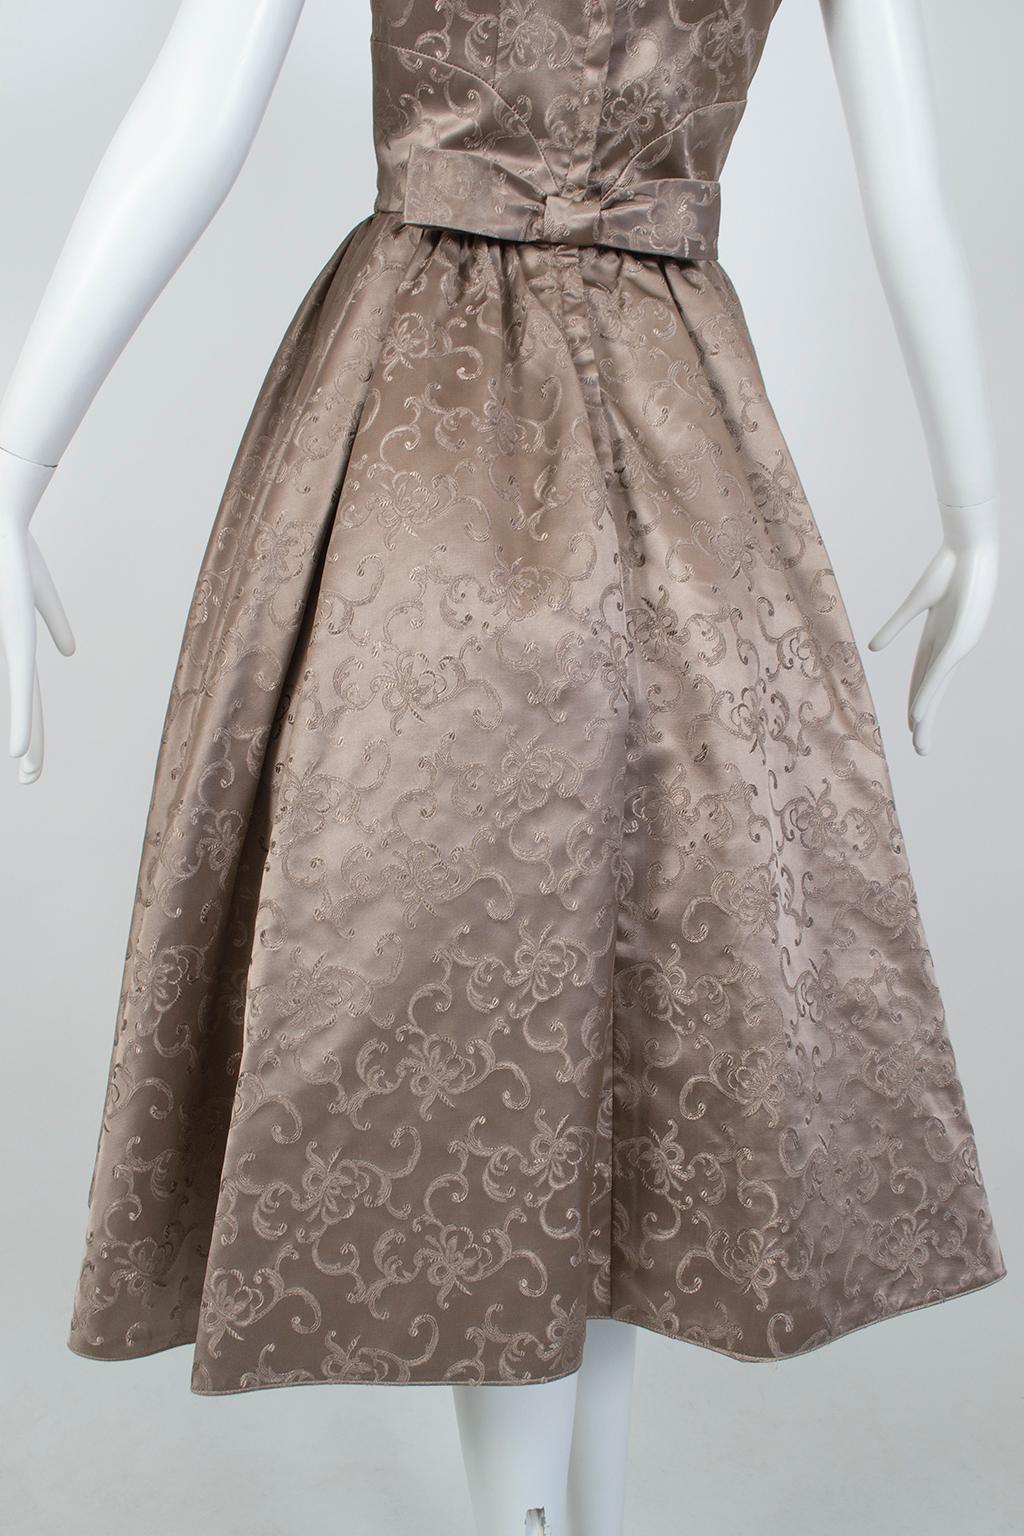 New Look Taupe Silk Sateen Jacquard Cutaway Decolletage Party Dress - S, 1950s For Sale 3